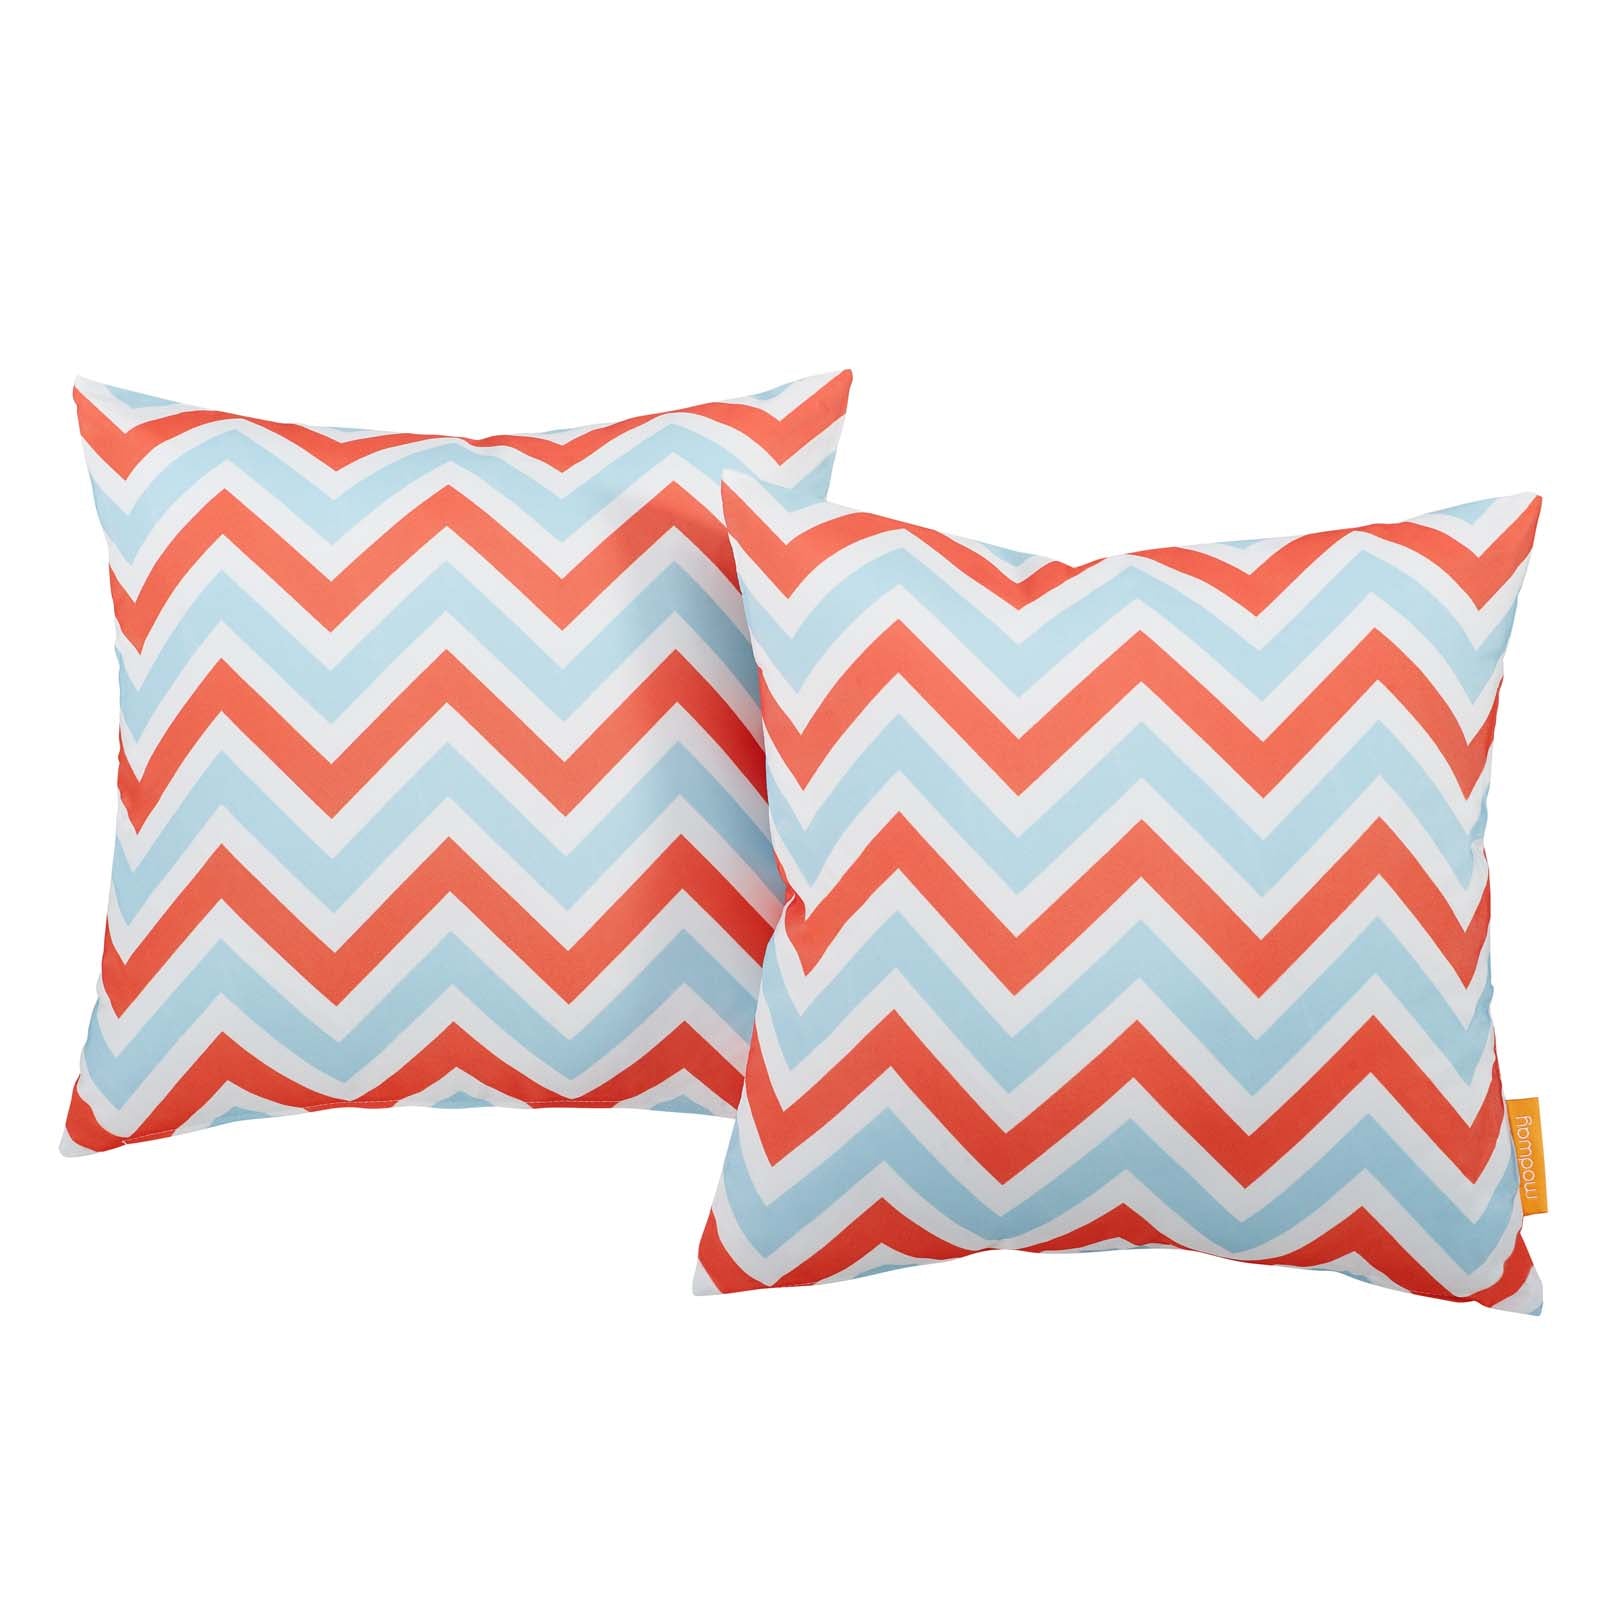 Modway Two Piece Outdoor Patio Pillow Set